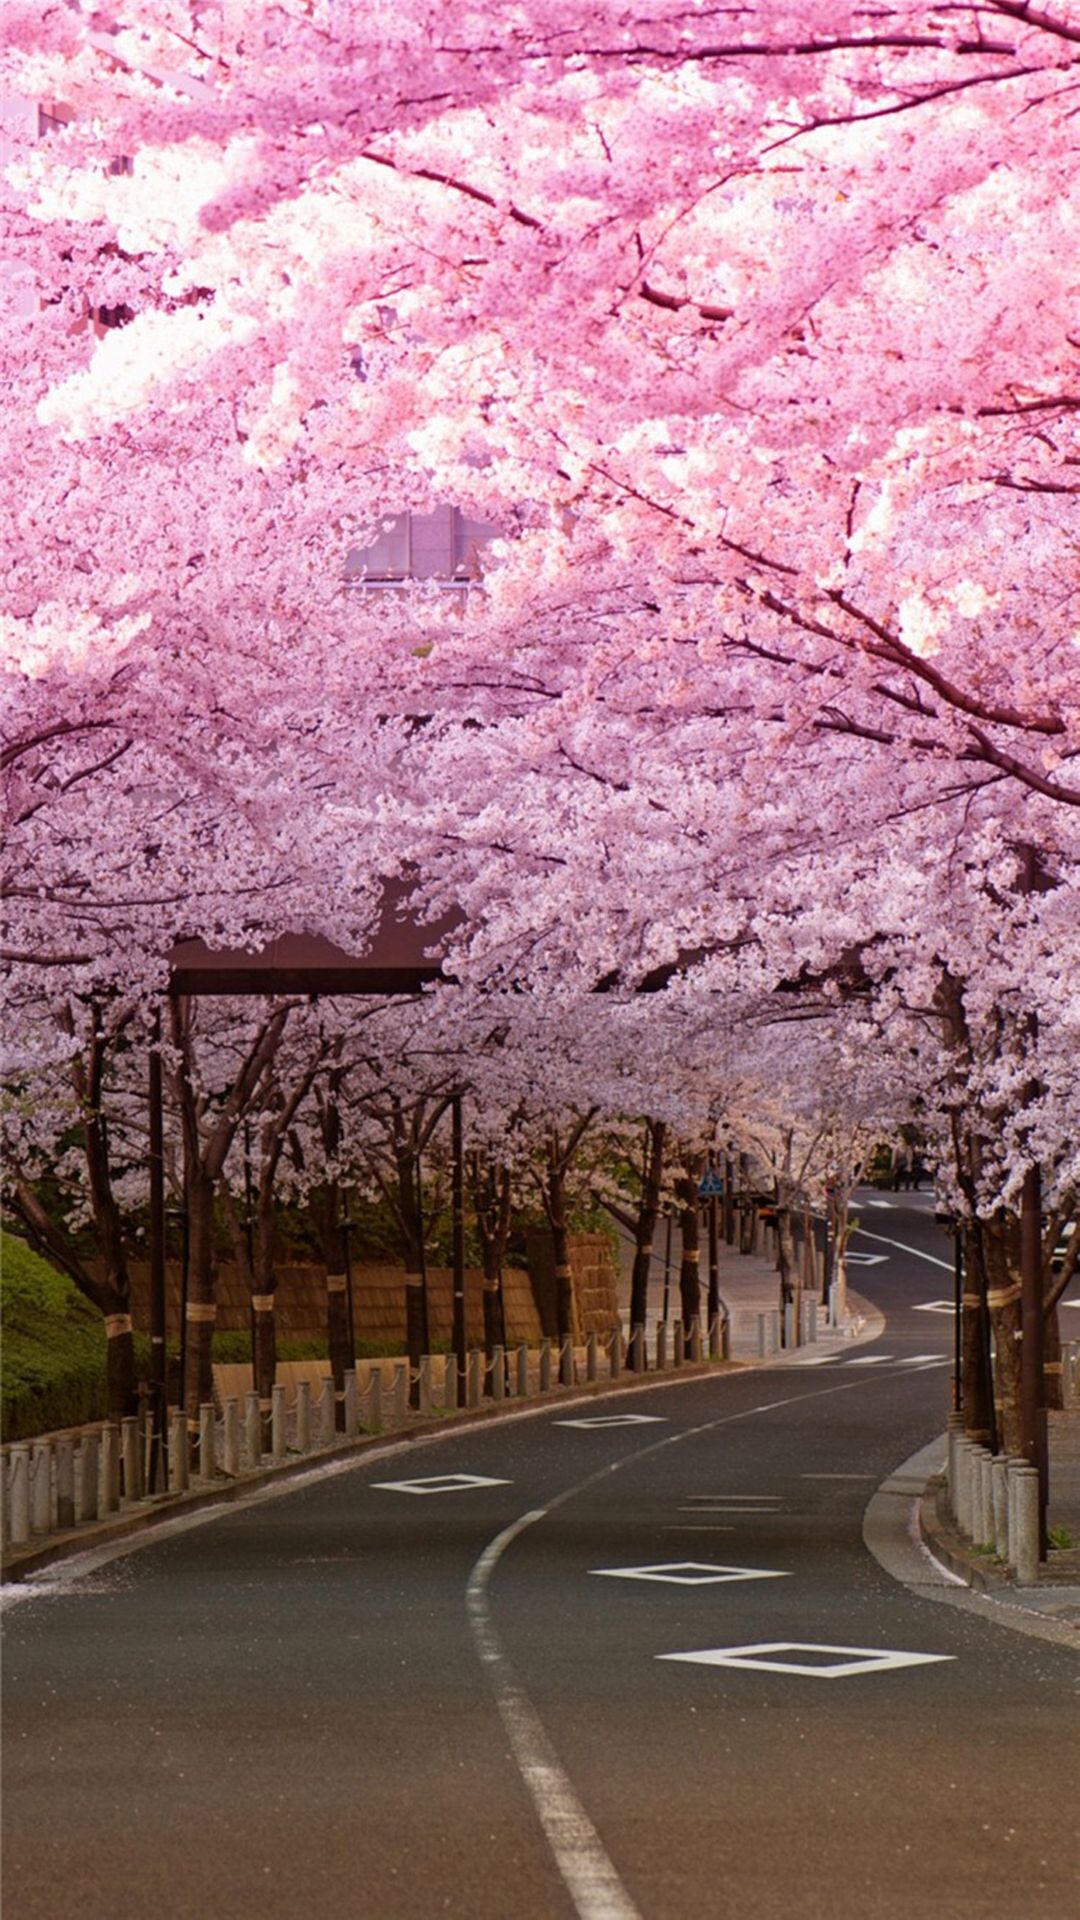 Bright Cherry Blossom Road iPhone 8 Wallpaper Free Download